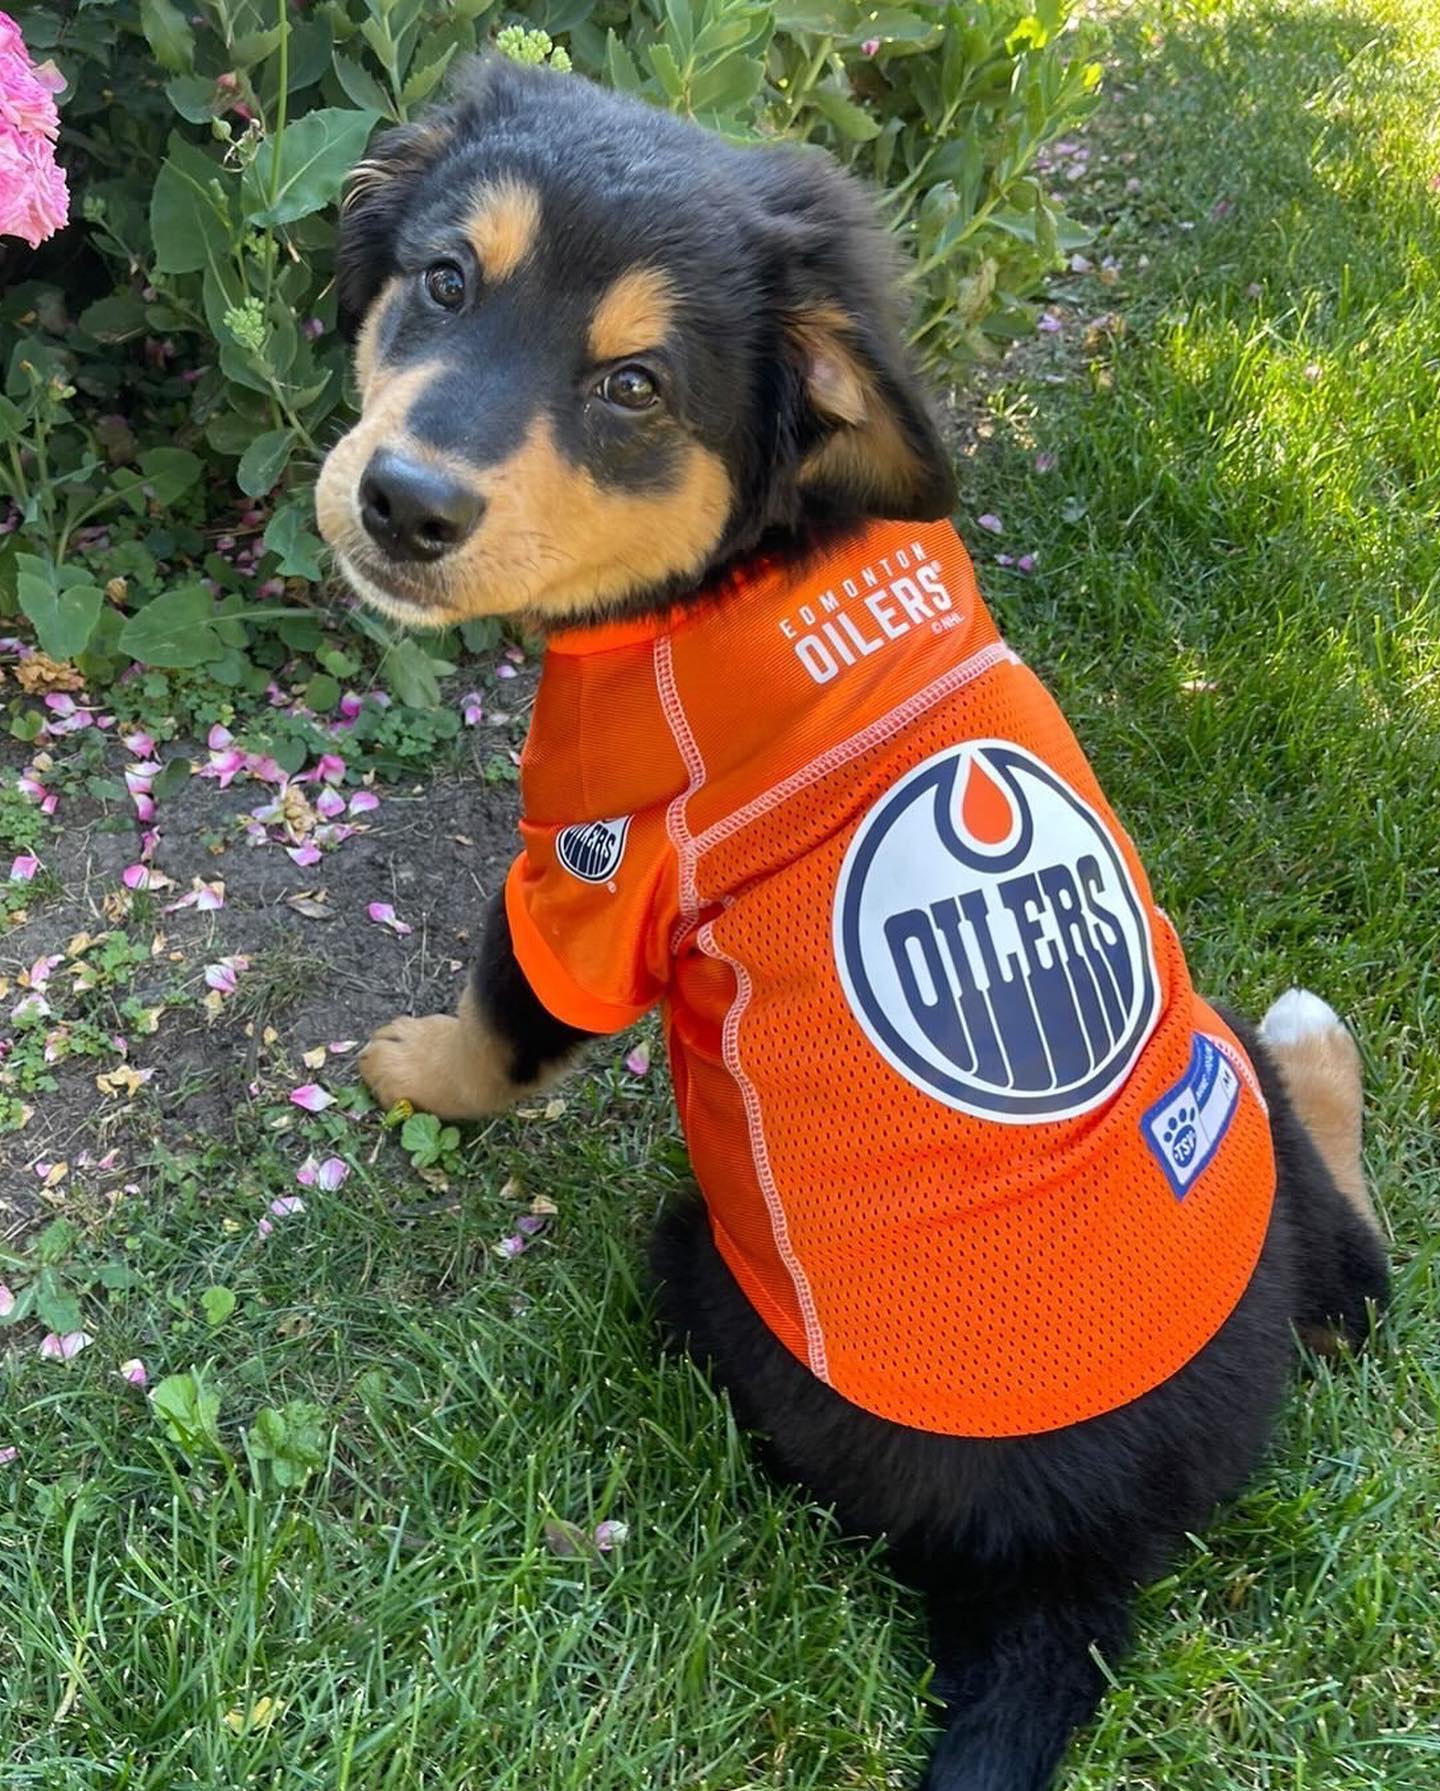 BREAKING NEWS: Jack Campbell’s puppy is adorable.  #LetsGoOilers...